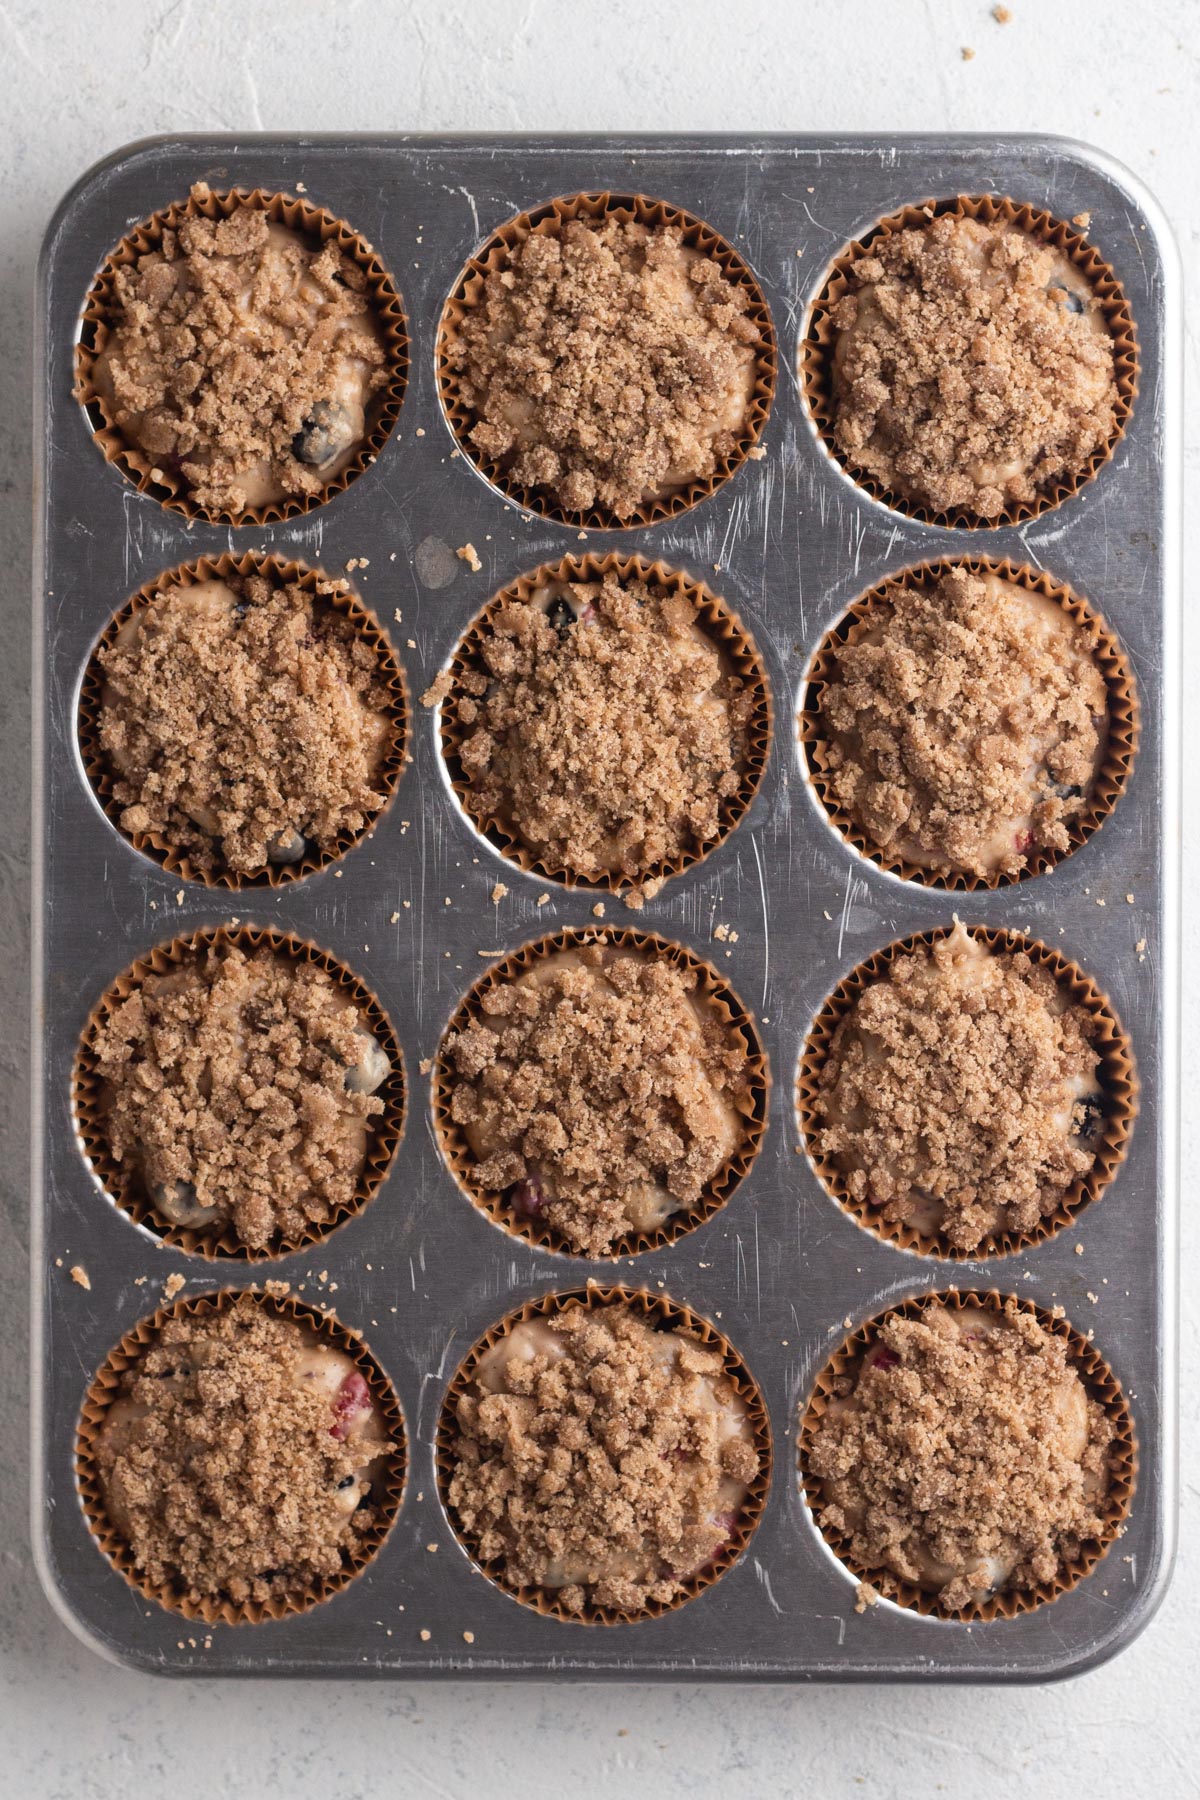 Muffin batter topped with streusel in a muffin pan.